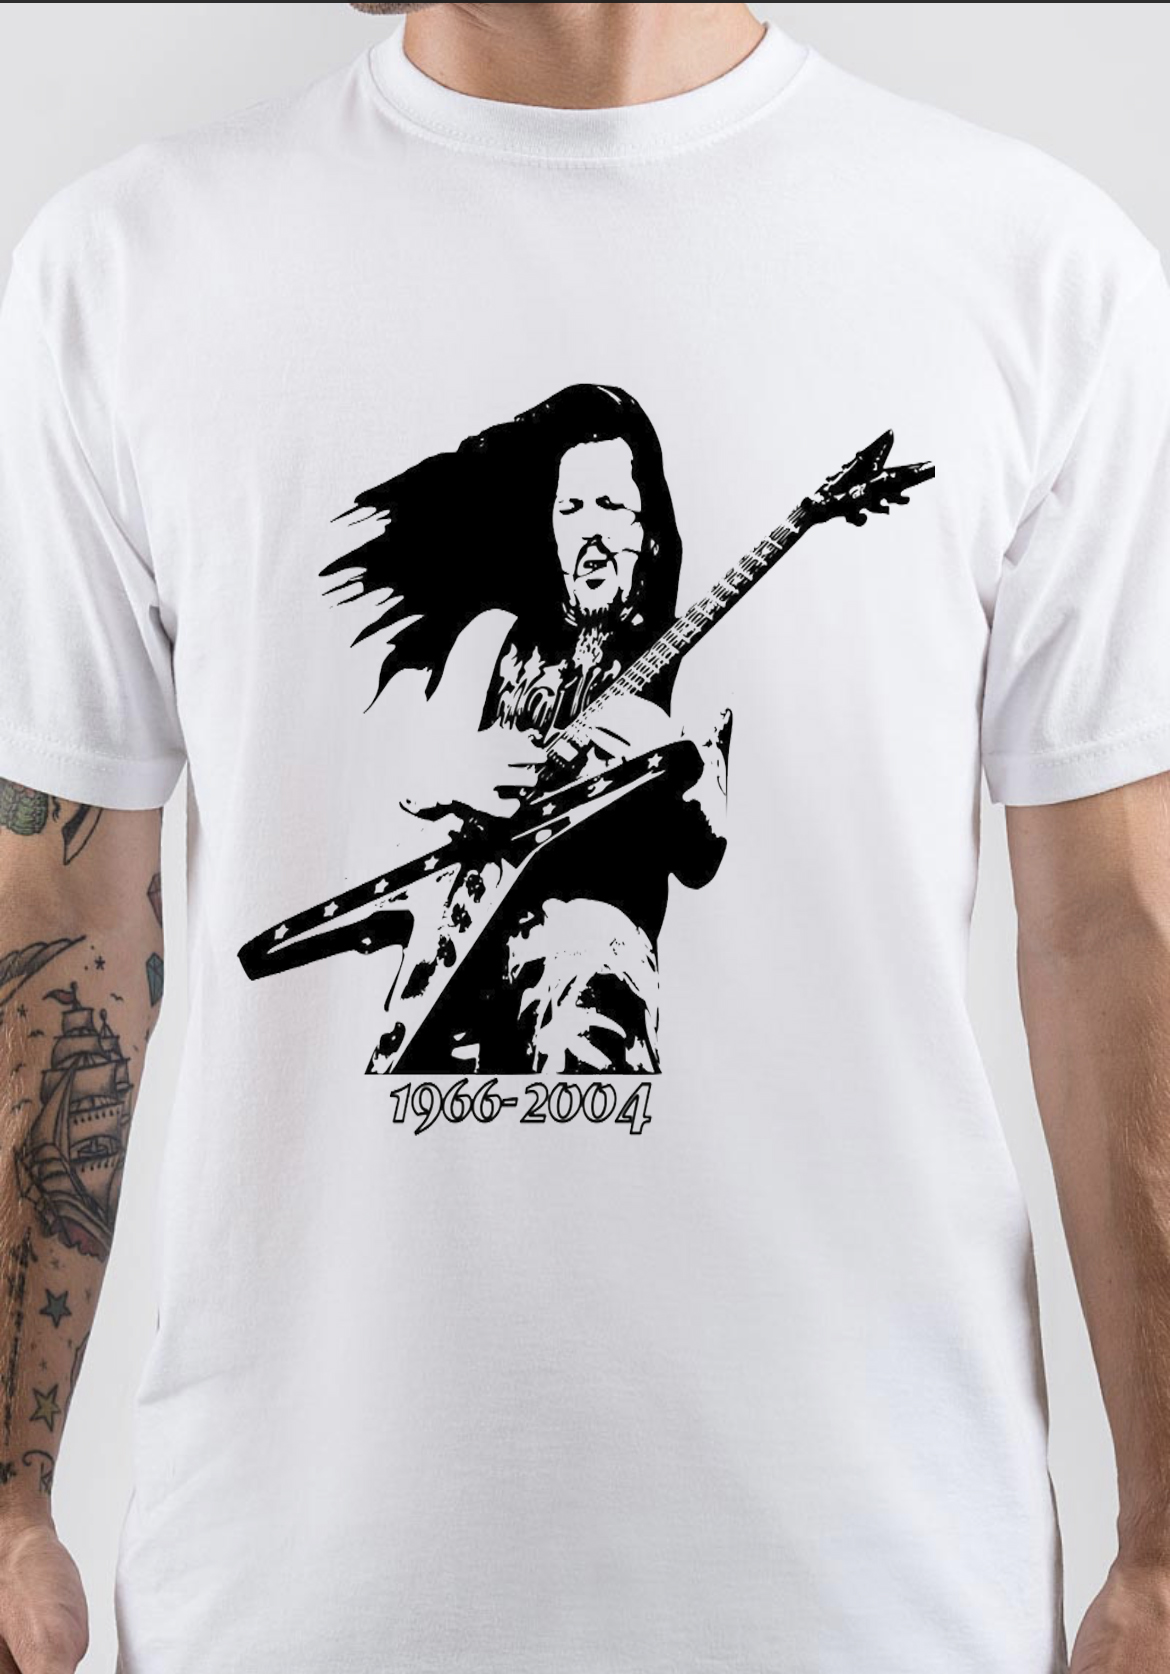 Dimebag Darrell T-Shirts Archives - Nocturnal Prototype